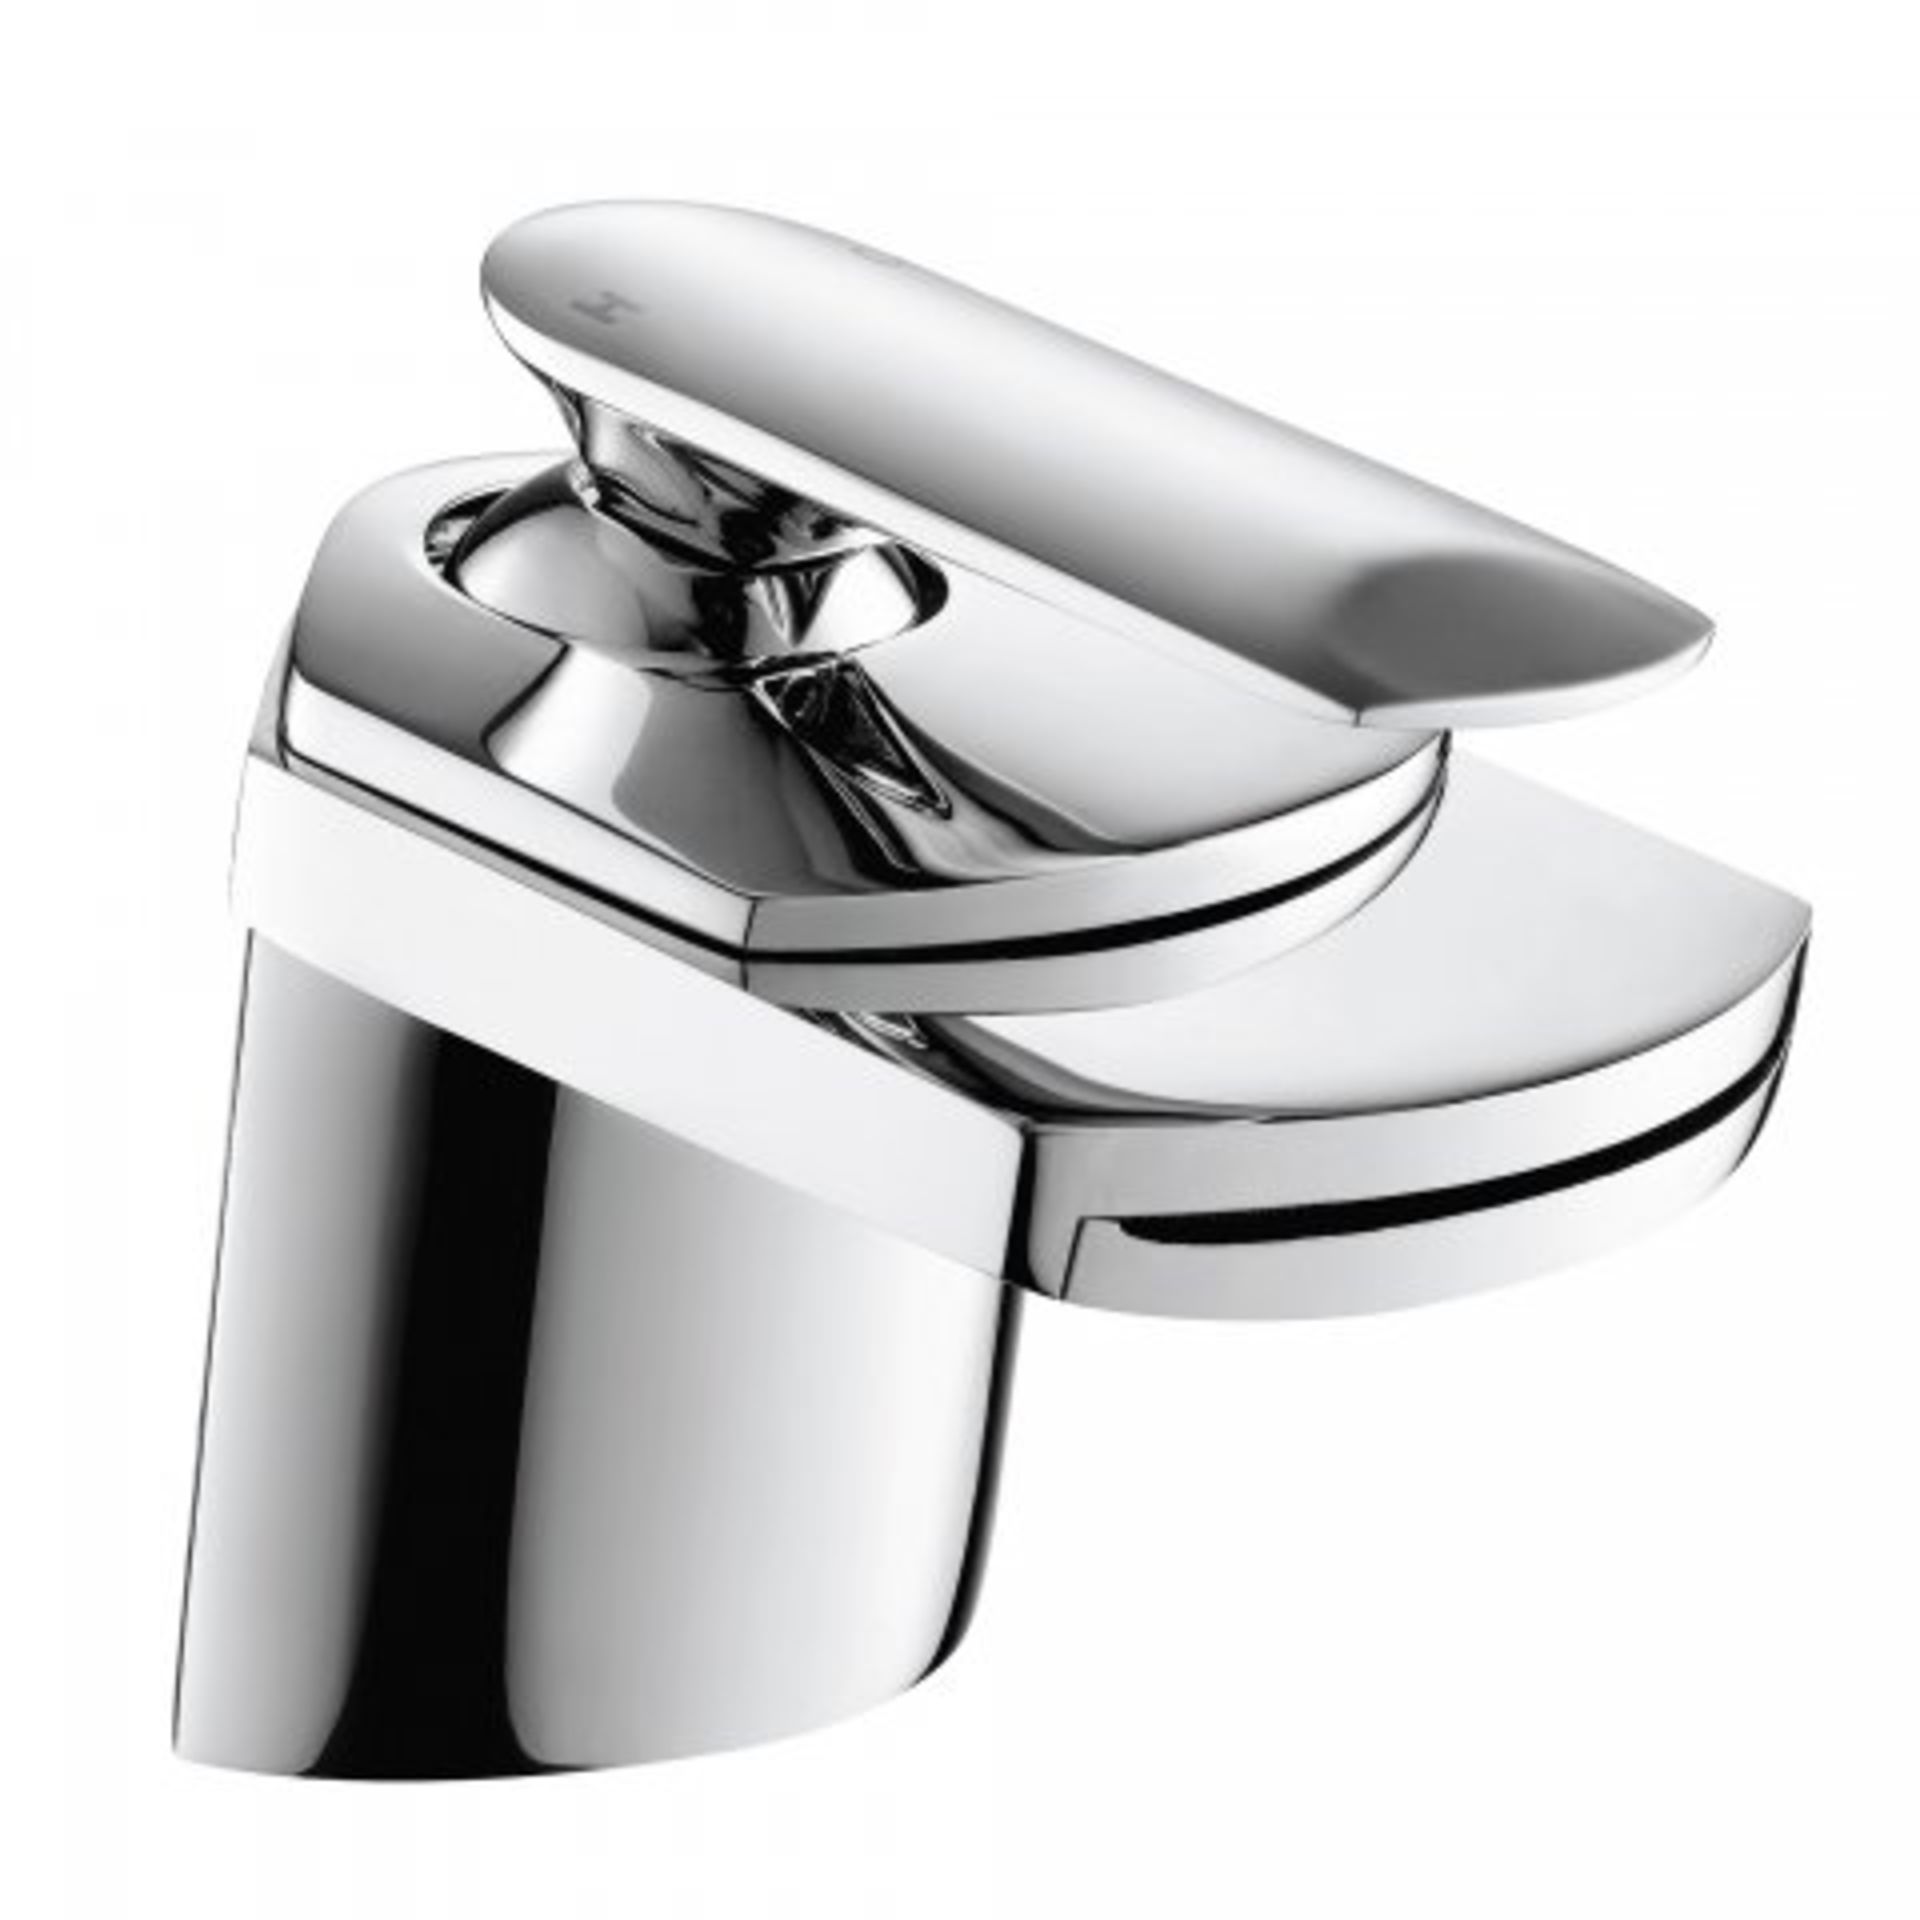 (I99) Oshi Waterfall Basin Mixer Tap Assured Performance Maintenance free technology is incorporated - Image 2 of 5